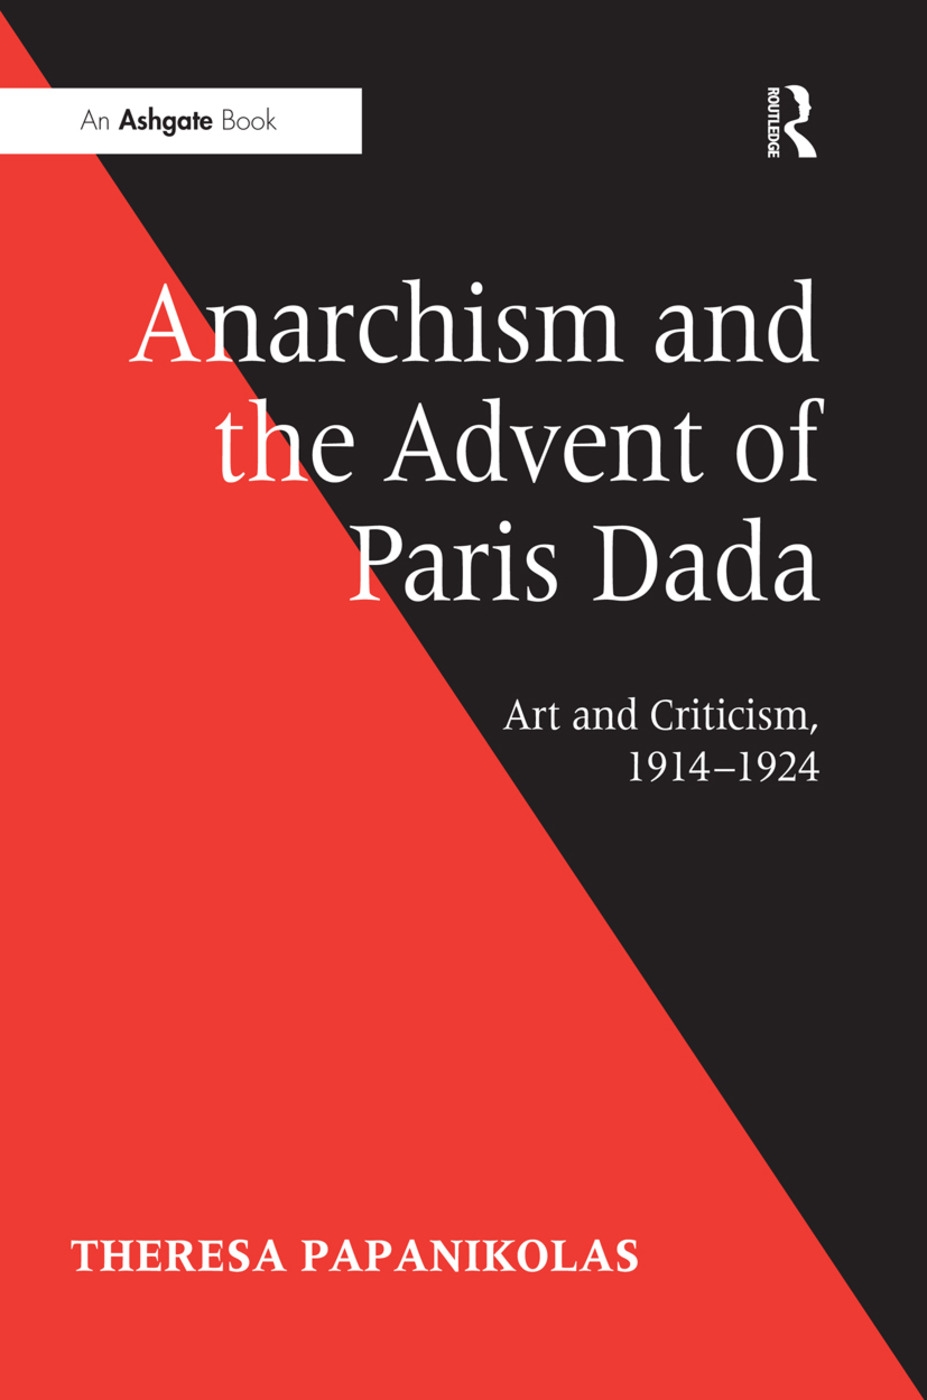 Anarchism and the Advent of Paris Dada: Art and Criticism, 1914 1924